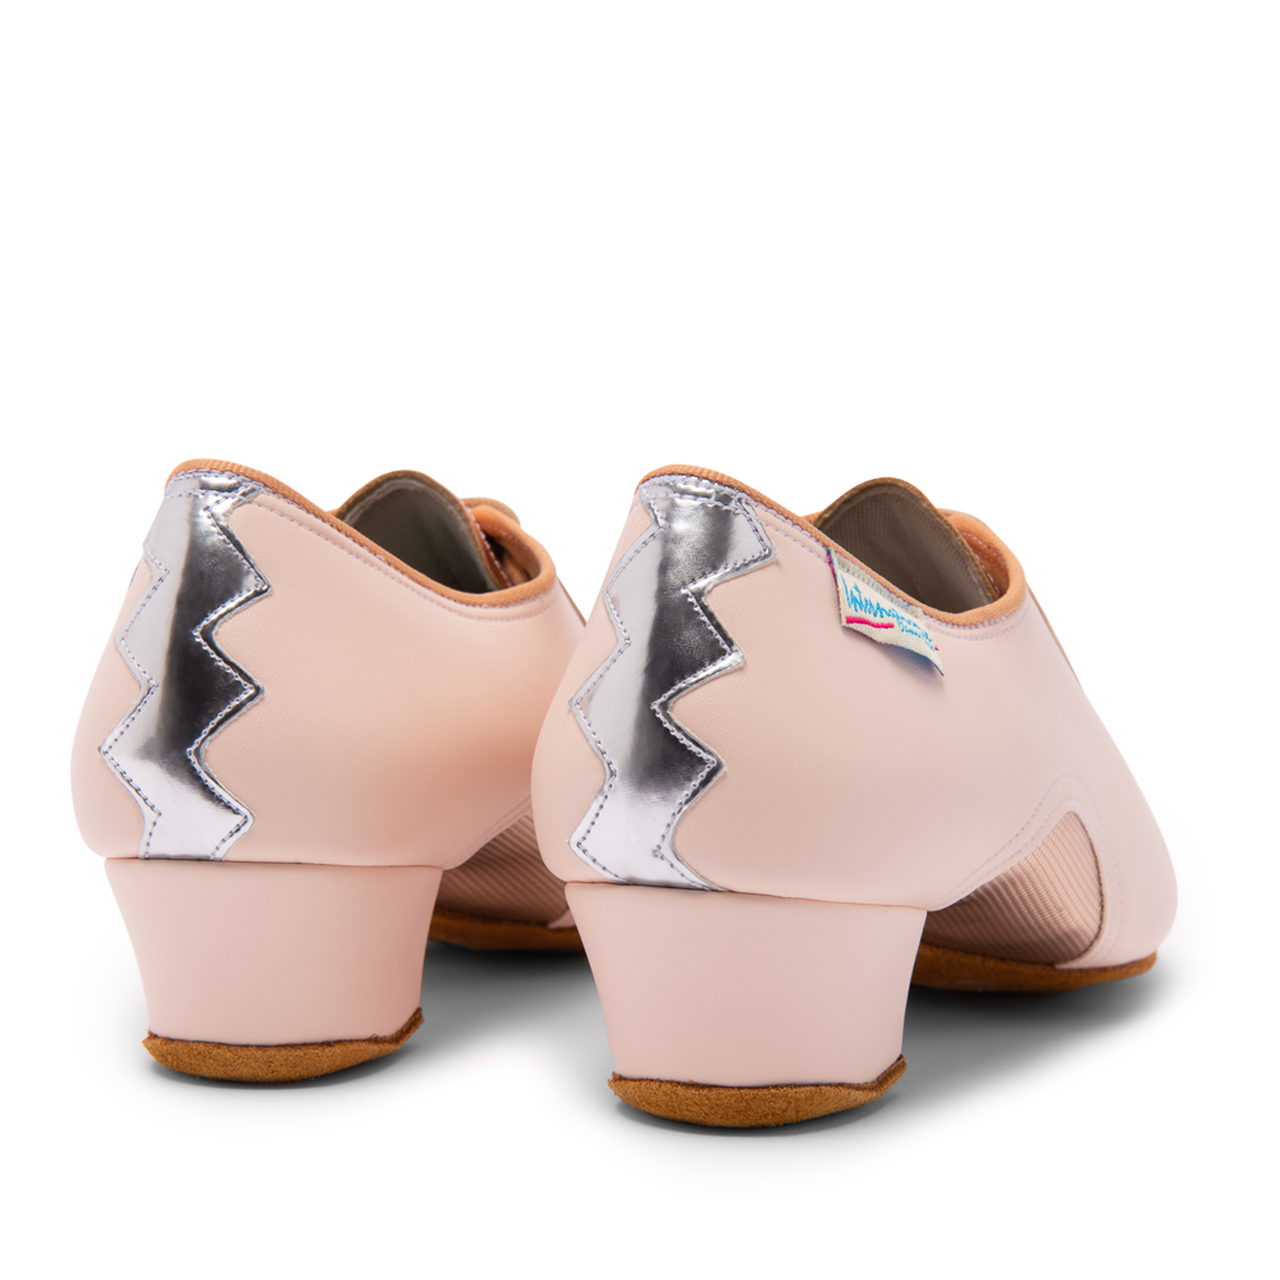 International Dance Shoes IDS Artiste SS Himalayan Rose Teaching/Practice Shoe with Metallic Rose Gold Accents in Stock